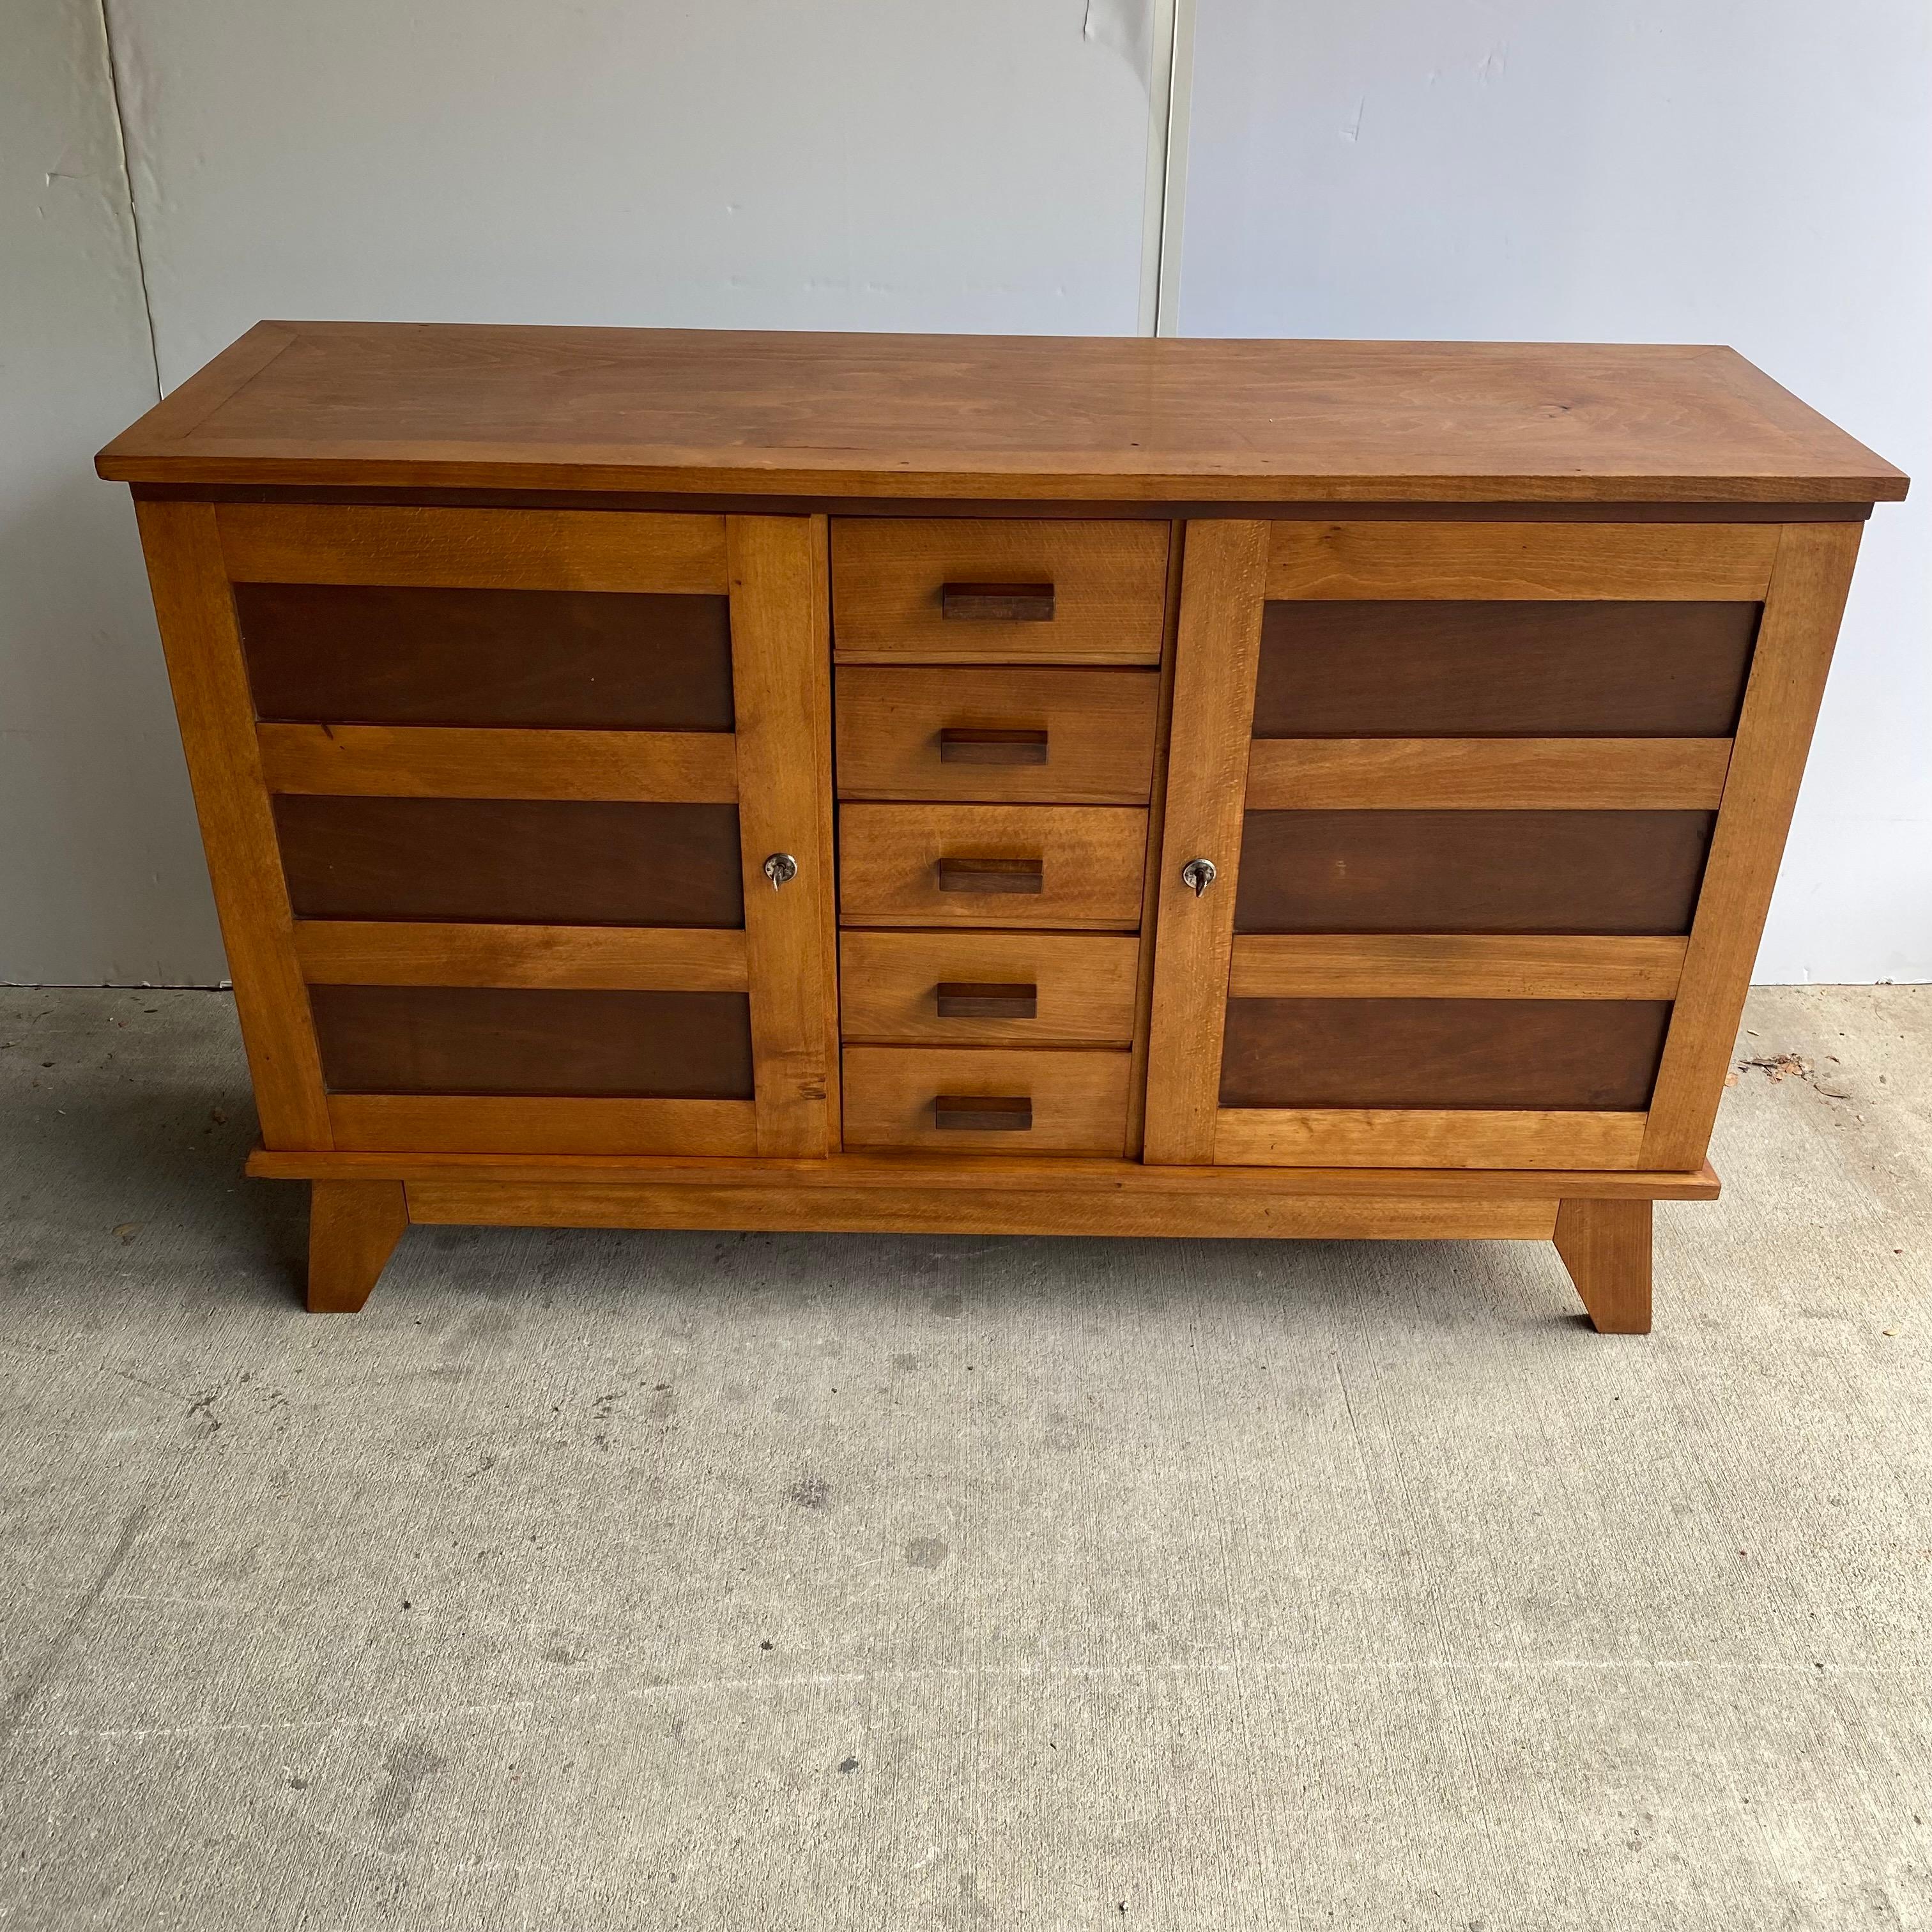 A collectible piece of furniture by Rene Gabriel, the designer commissioned to rebuild the city of La Havre after WW II. Features two doors and 5 drawers in his sought after two tone oak cabinet style. A strong expression of the early Mid-Century